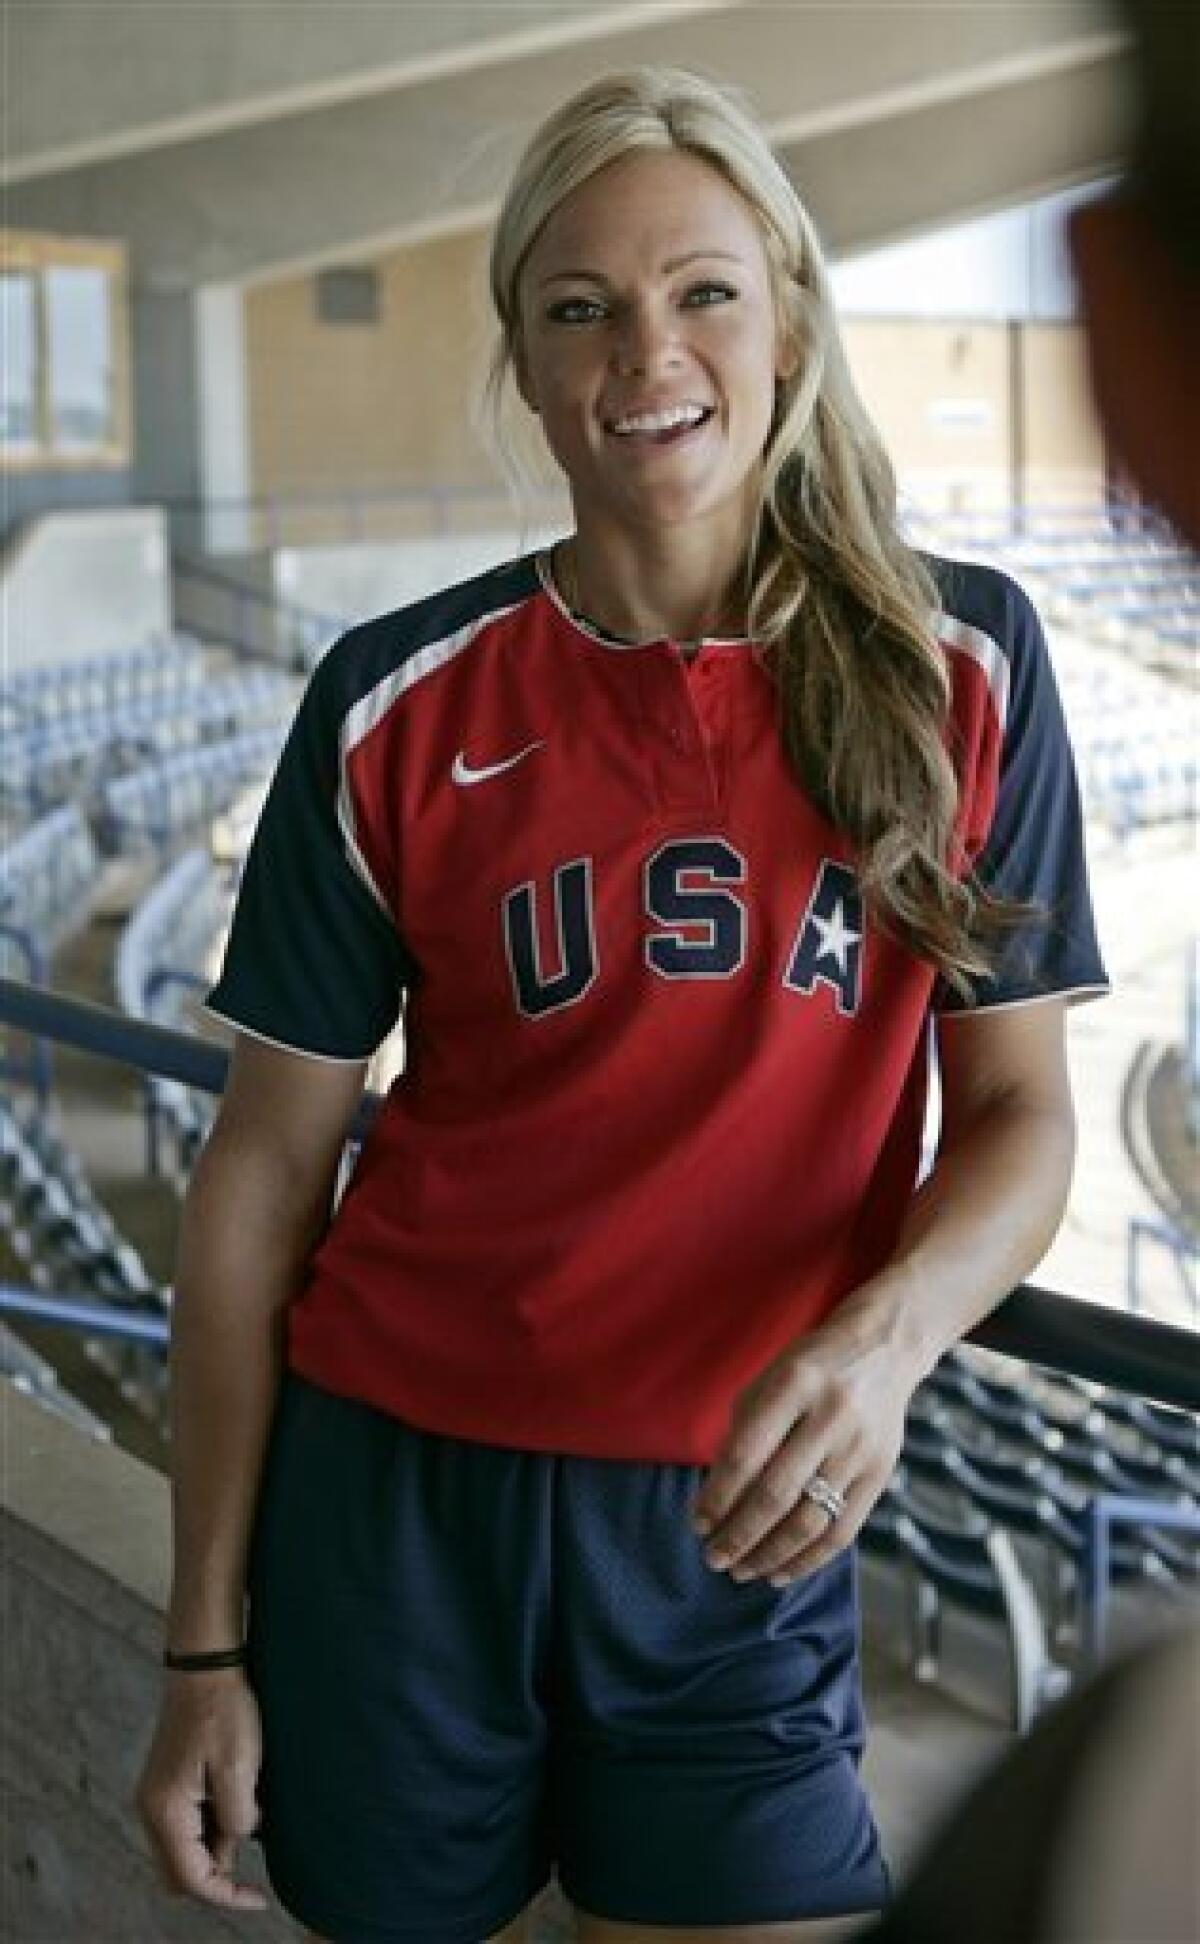 Olympic gold medalist Jennie Finch talks about her decision to retire during an interview in Oklahoma City, Tuesday, July 20, 2010. (AP Photo/Sue Ogrocki)